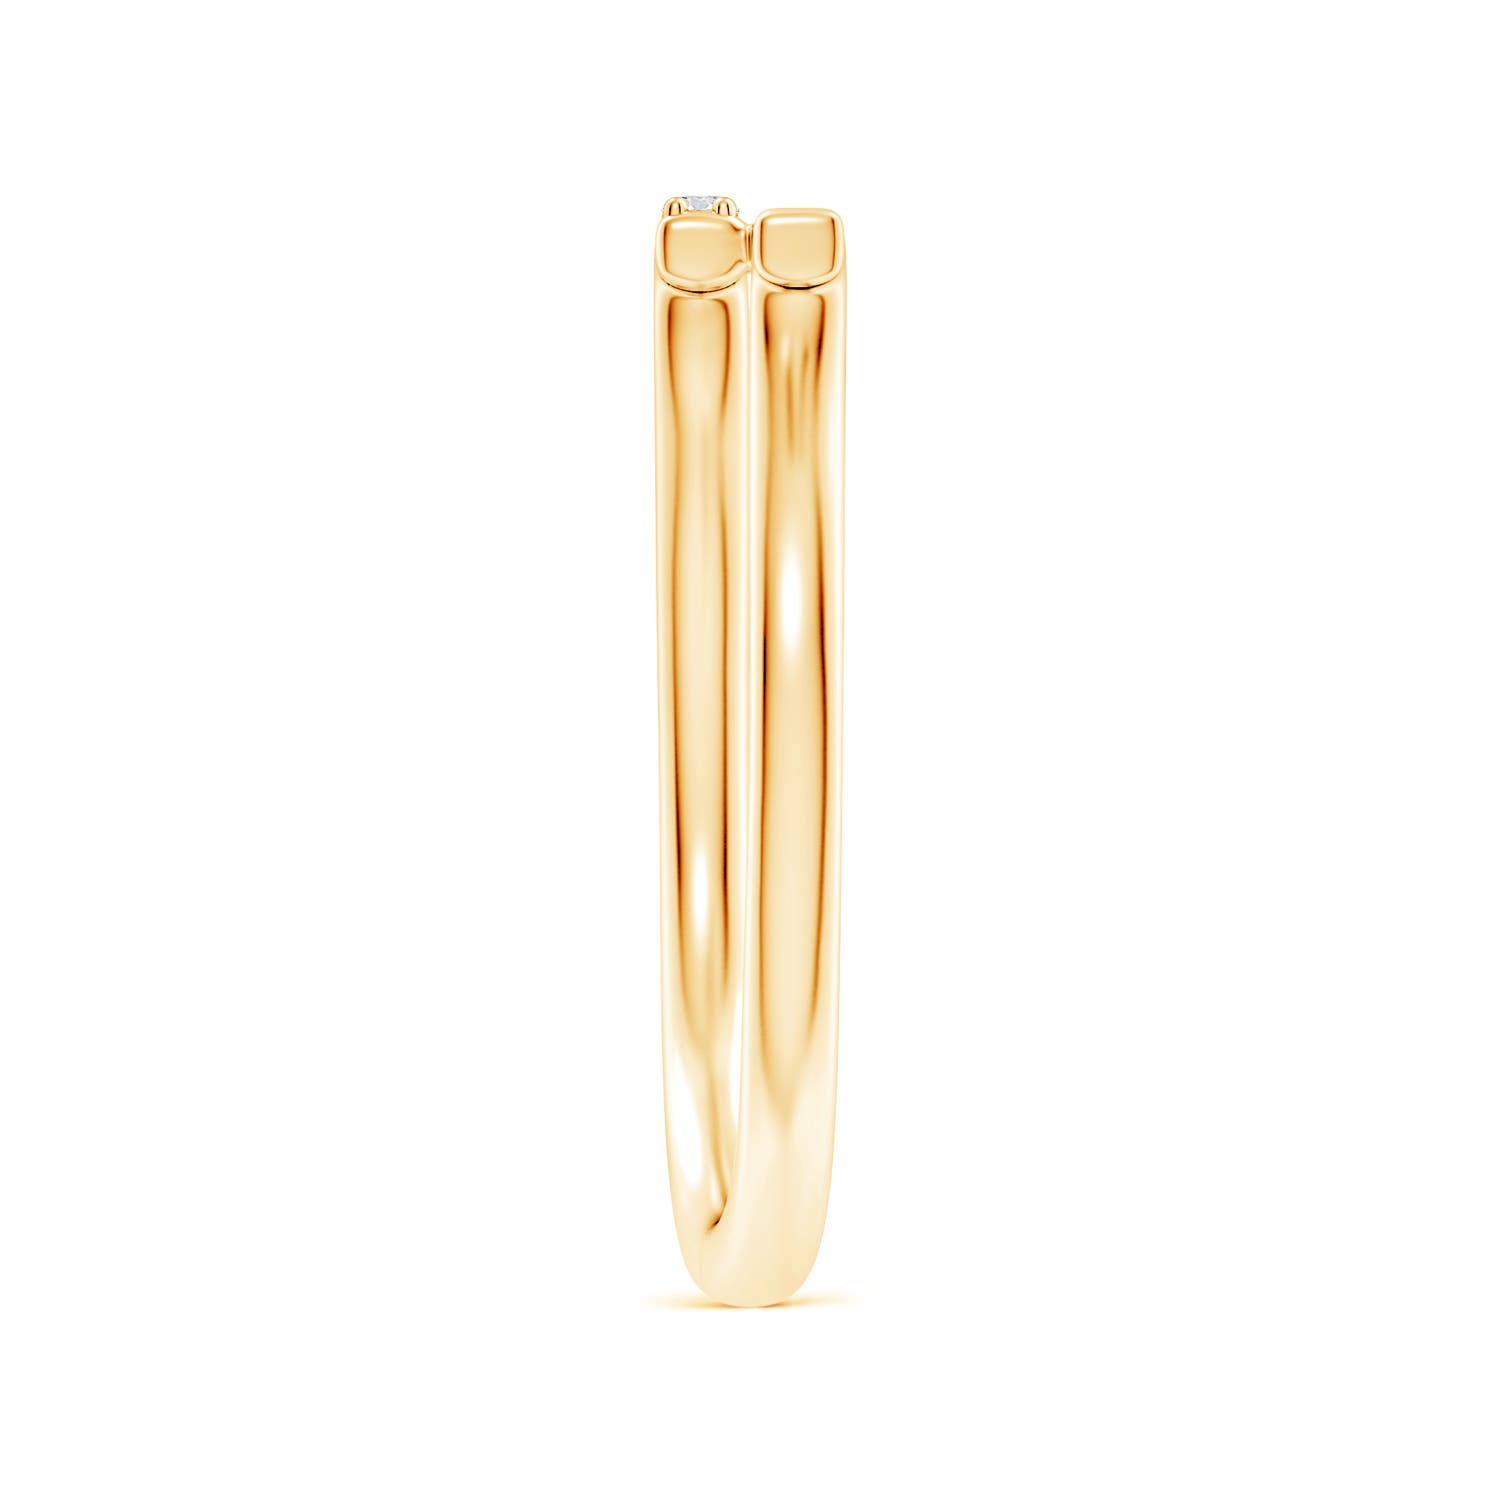 H, SI2 / 0.09 CT / 14 KT Yellow Gold